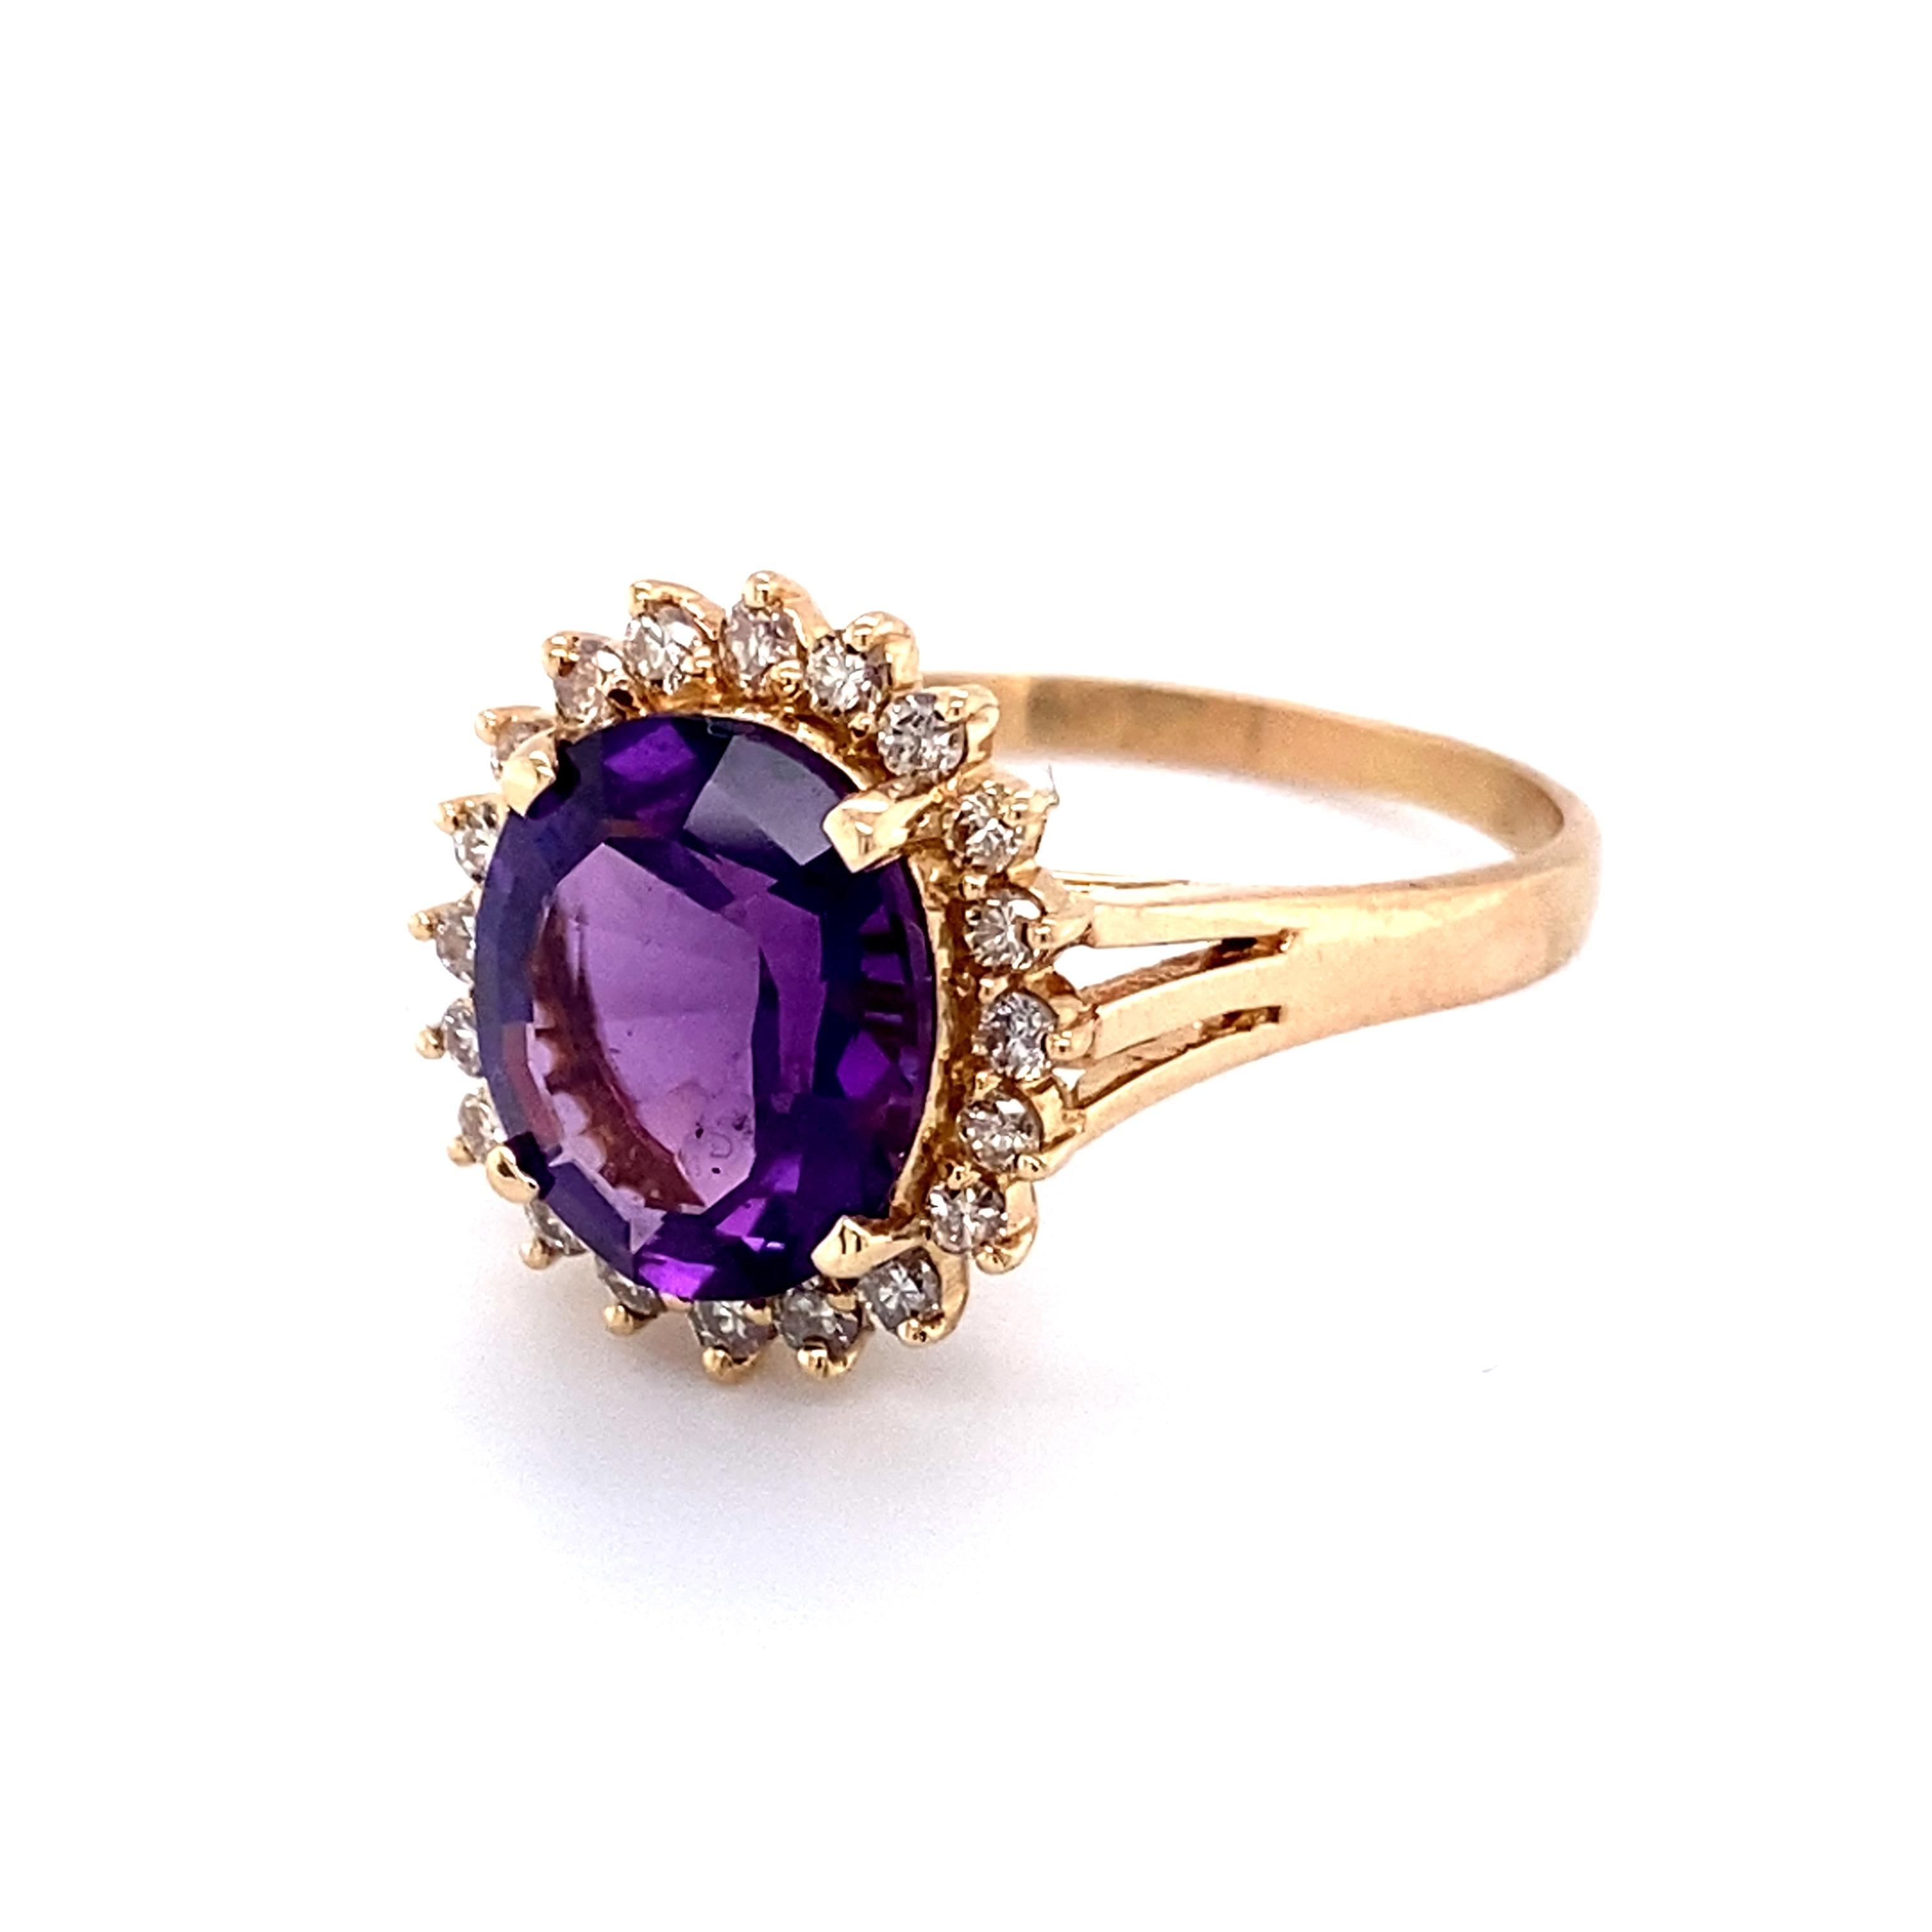 Item Details:
Size: 11, can be resized
Metal: 14 Karat yellow Gold
Weight: 5.4 grams

Amethyst Details:
Cut: Oval
Carat: 4.24 carats 
Color Medium to Deep Purple

Diamond Details:
Cut: Round
Carat: 0.20 carat total weight
Color: I-J
Clarity: